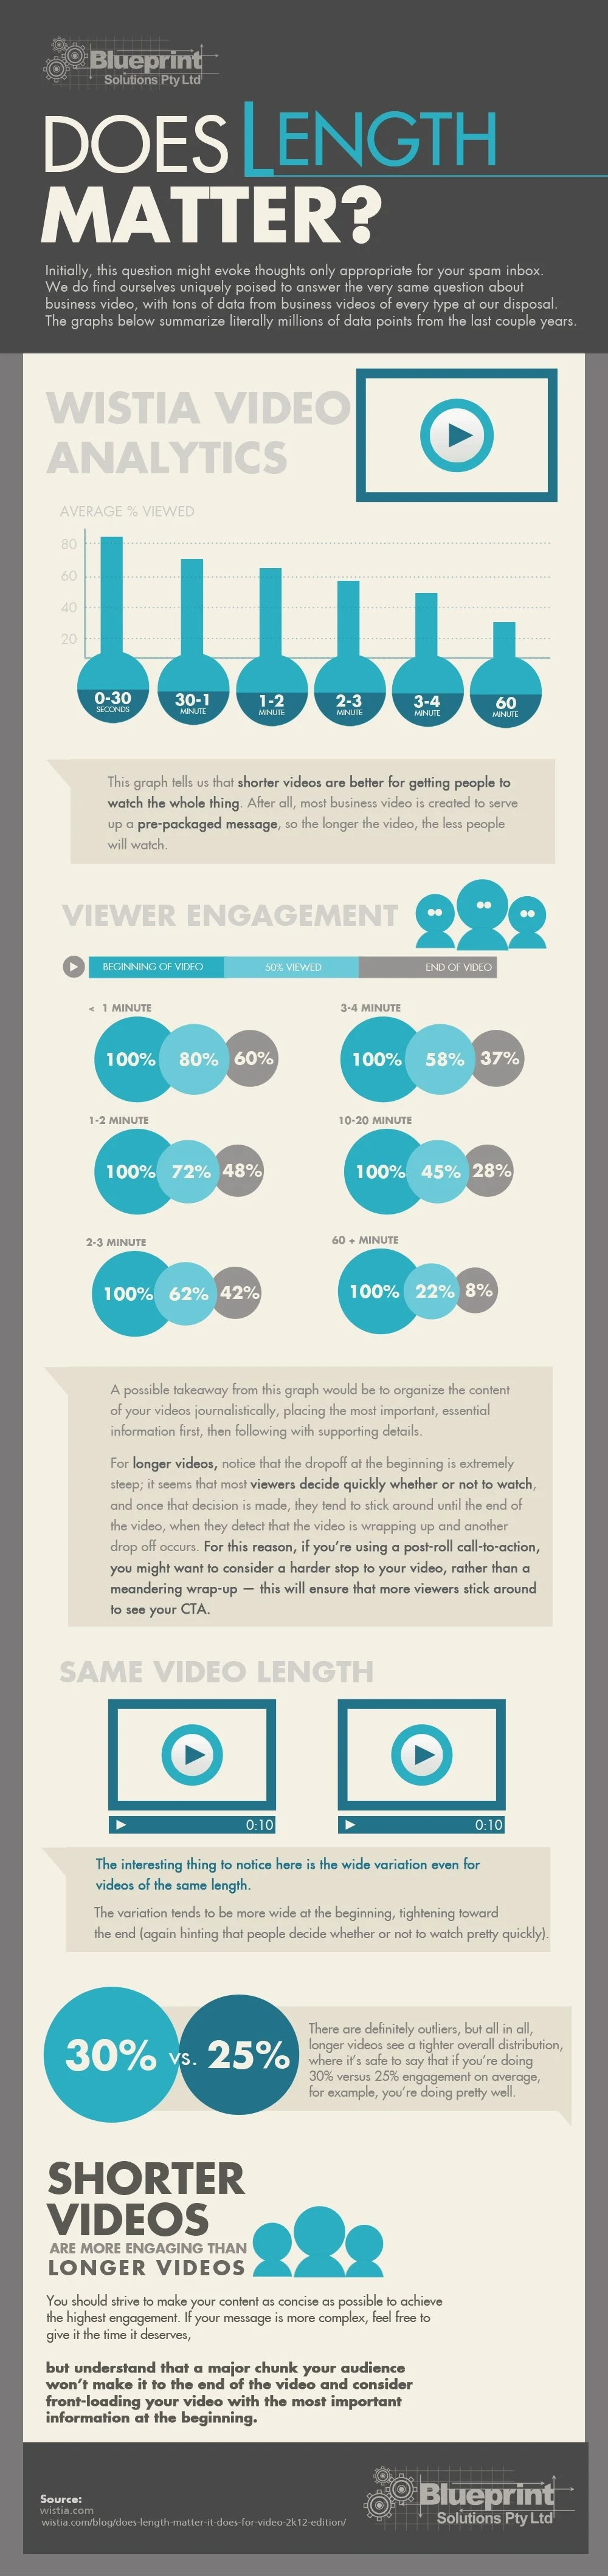 What Is a Good Creative Brief for a Video? [Infographic]